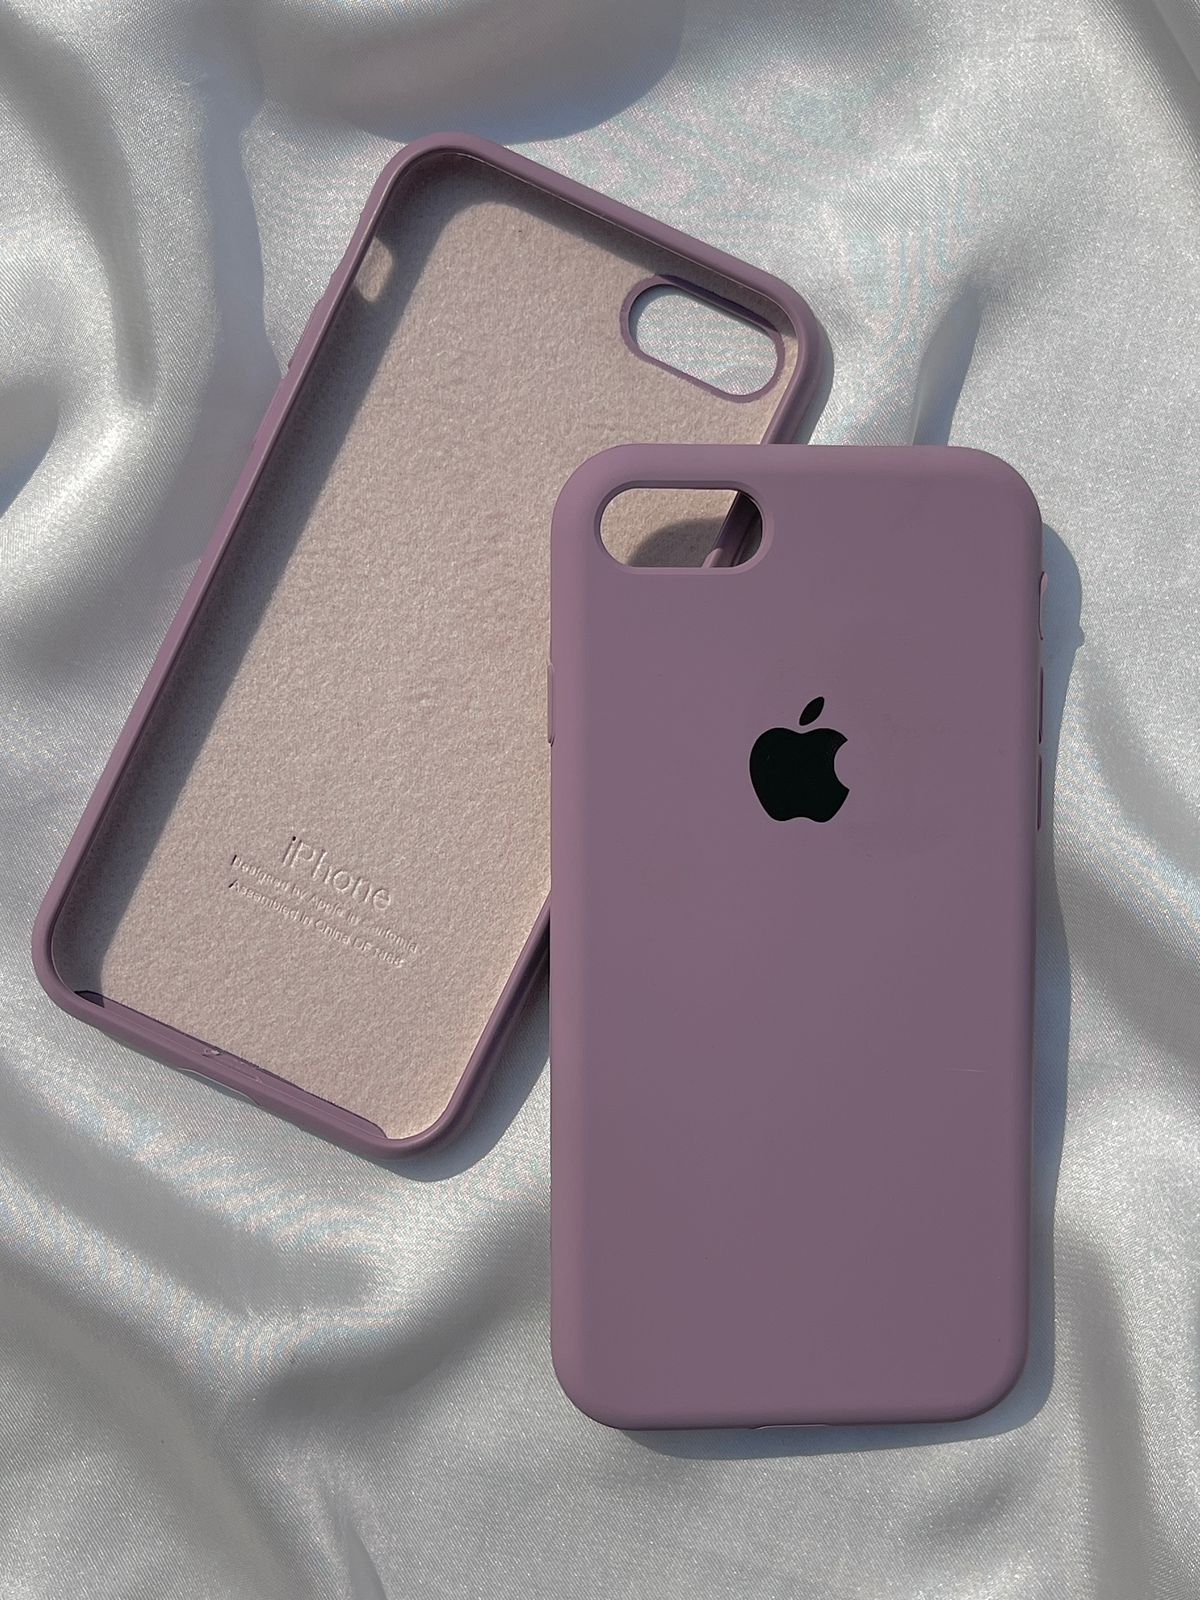 iPhone "7/8" Silicone Case "Dusty Pink"